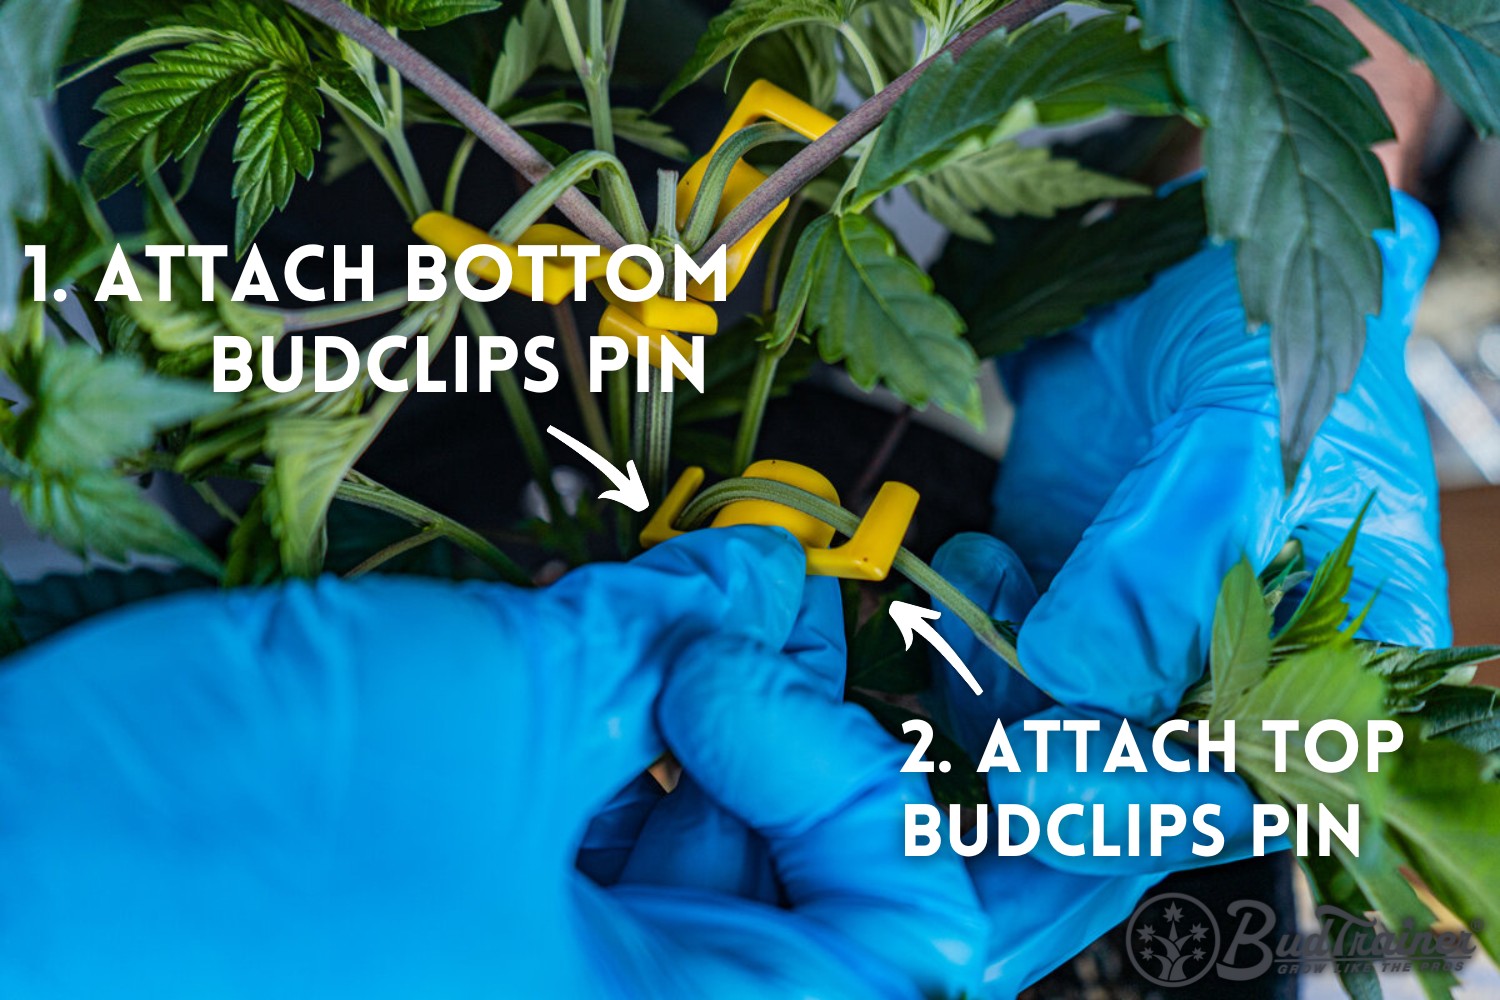 Person wearing blue gloves demonstrating how to attach a yellow BudClip to a cannabis plant branch, with labeled steps “1. Attach Bottom BudClips Pin” and “2. Attach Top BudClips Pin” and arrows pointing to the BudClip, and the BudTrainer logo in the bottom right corner.